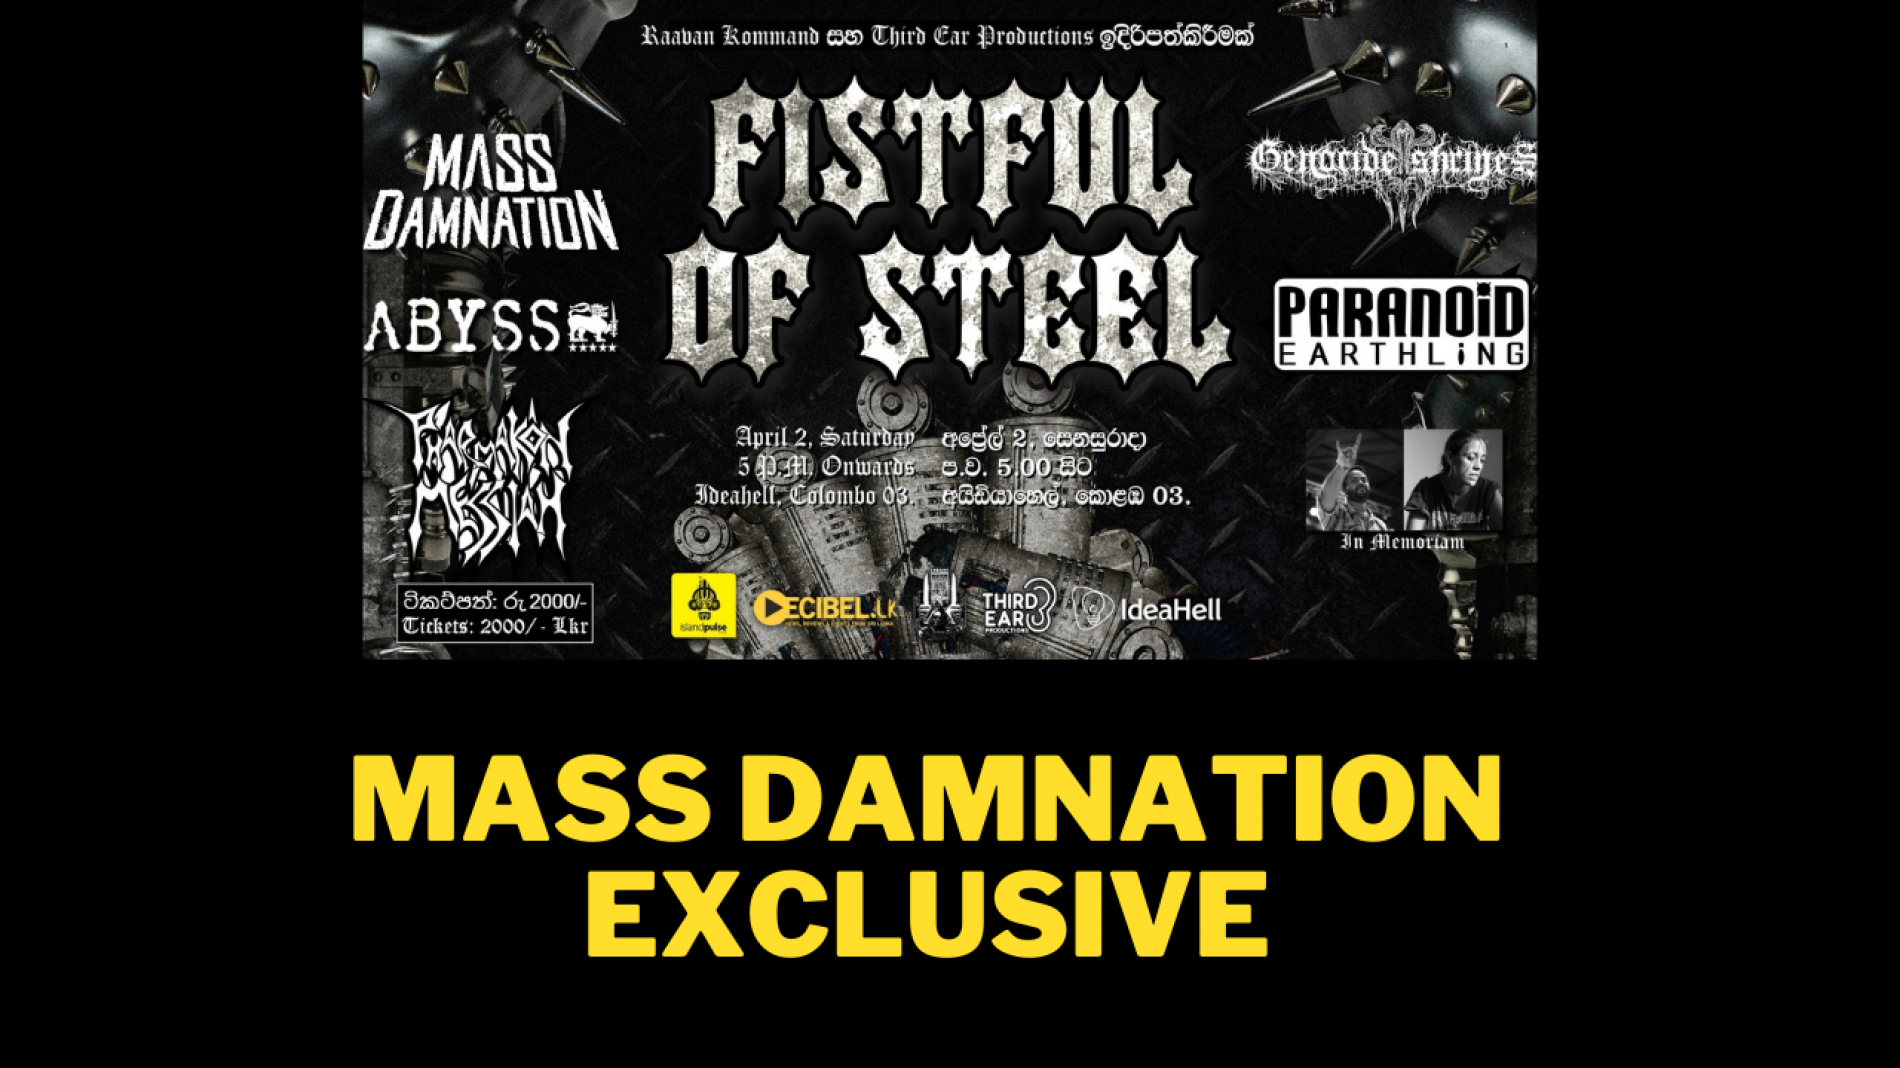 News : Mass Damnation To Perform @ A Fistful Of Steel This April